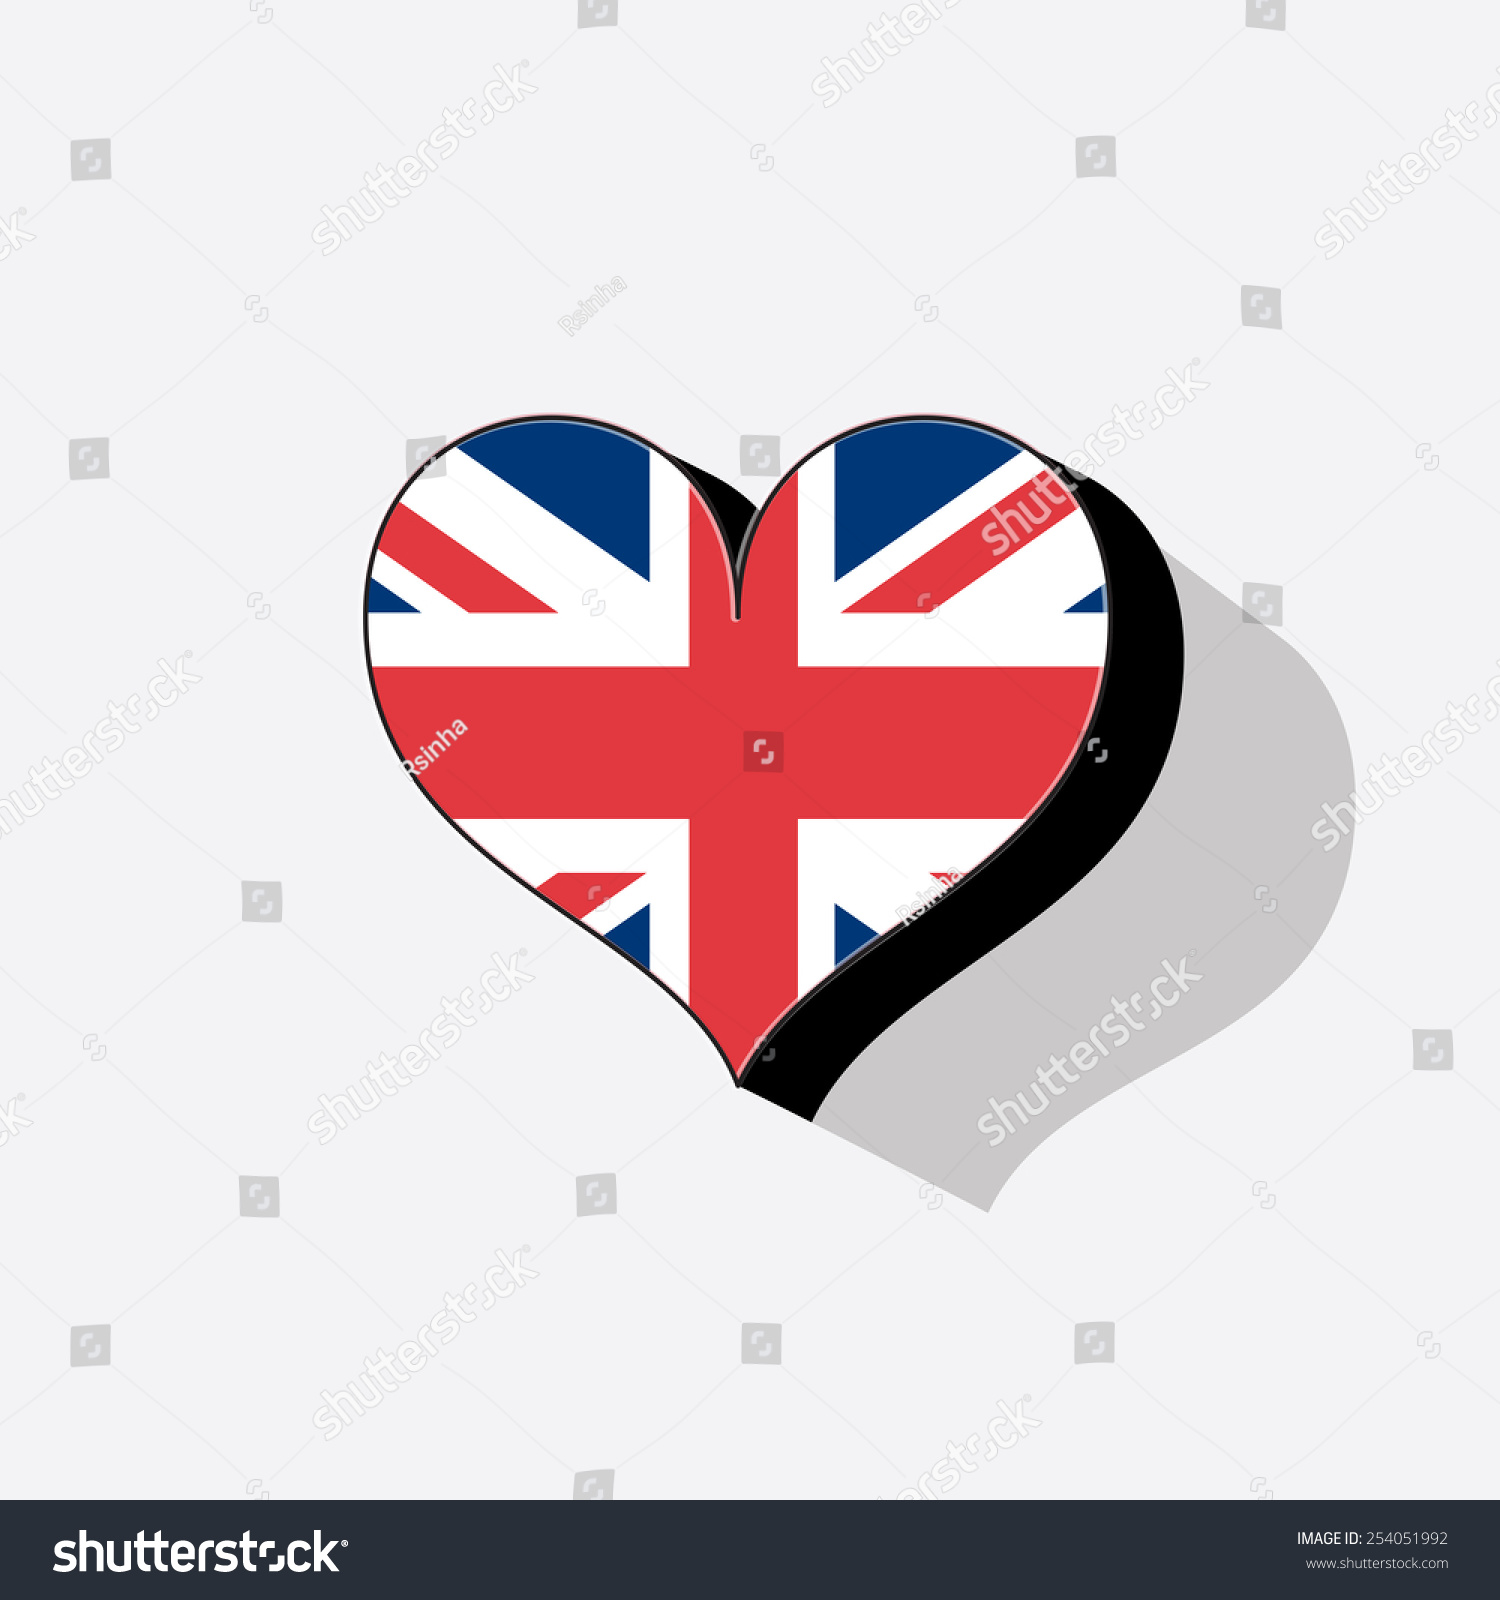 SVG of United Kingdom or UK flag in heart shape with long shadow.EPS10 svg